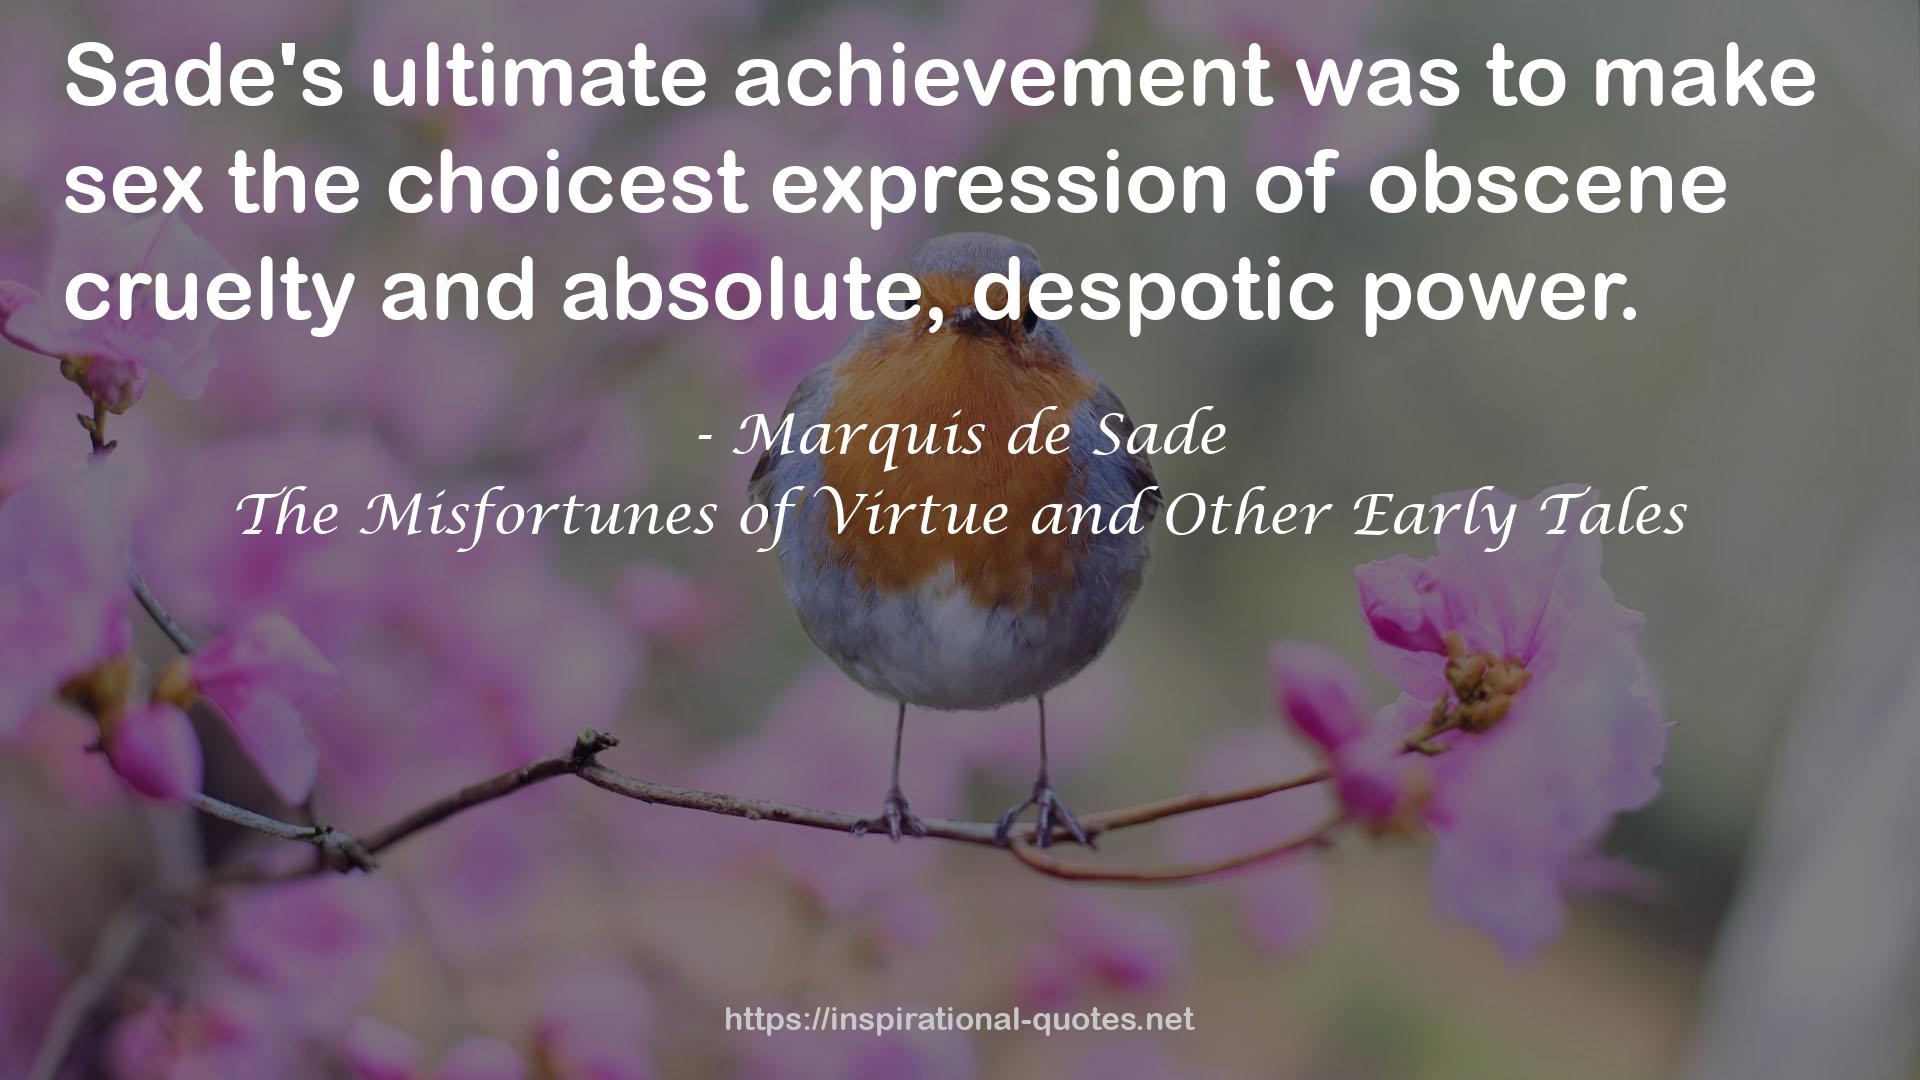 The Misfortunes of Virtue and Other Early Tales QUOTES